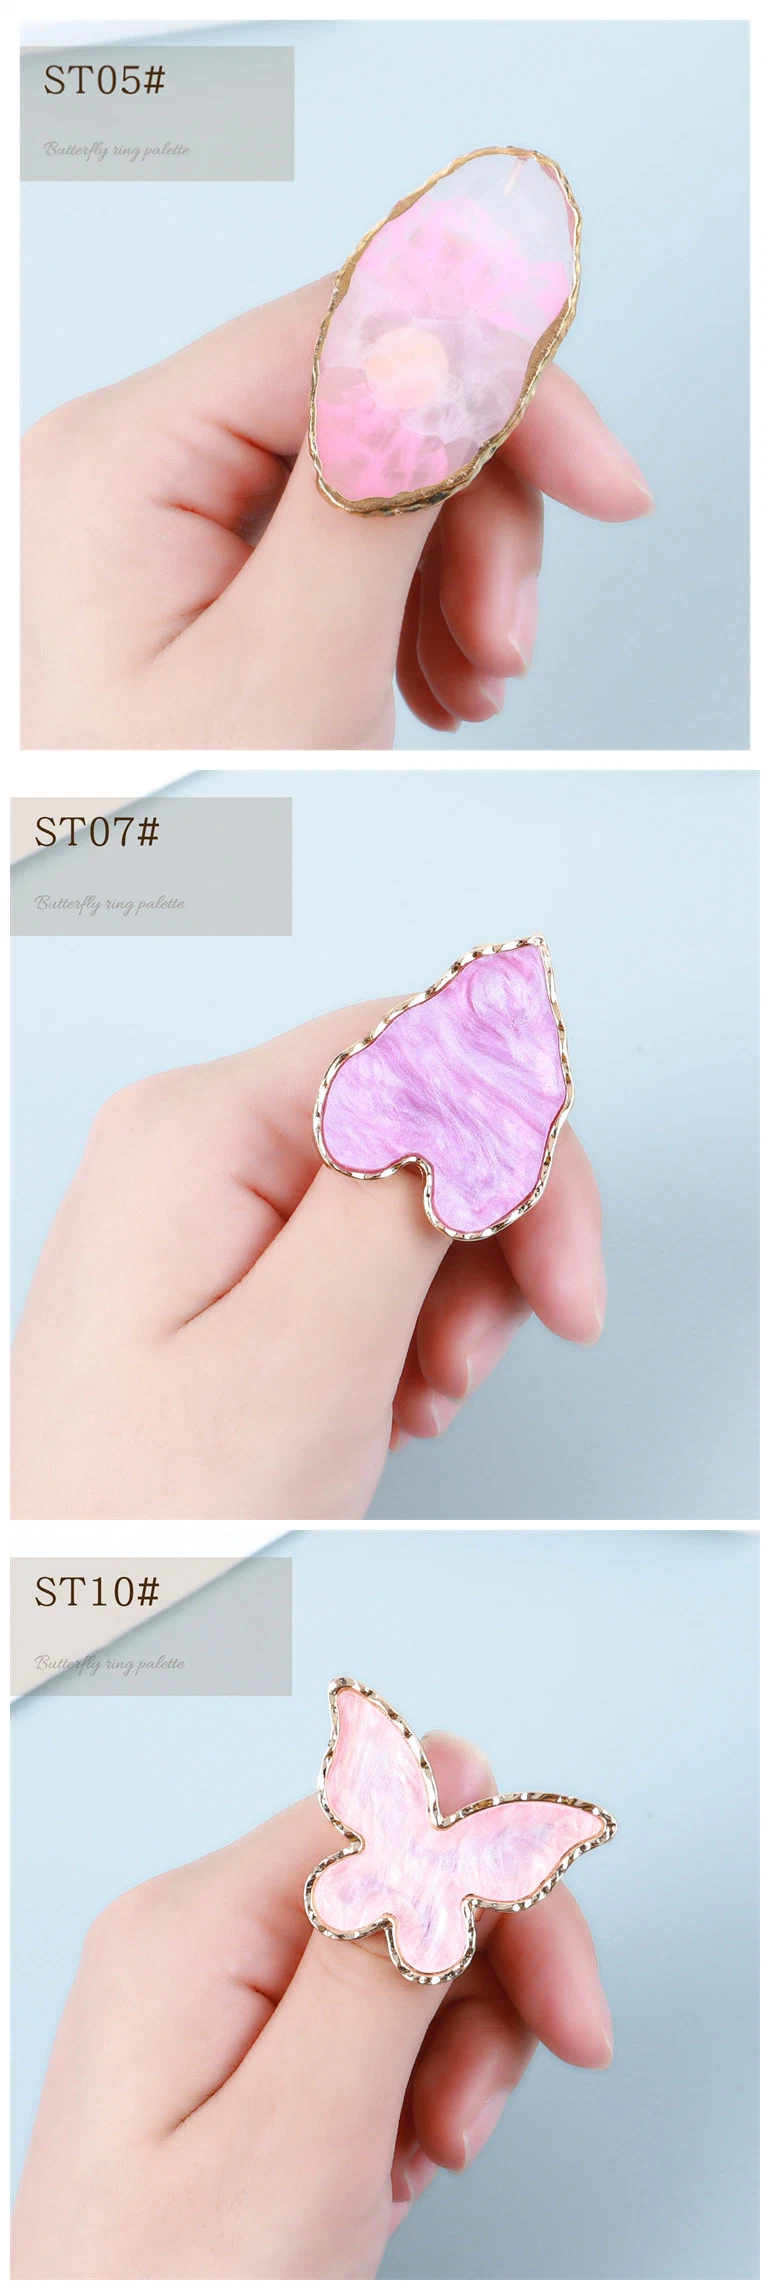 Net Red Japanese Resin Agate Piece Ring Palette Manicure Light Glue Painted Smudge Display Gold-Plated Gold Display Board